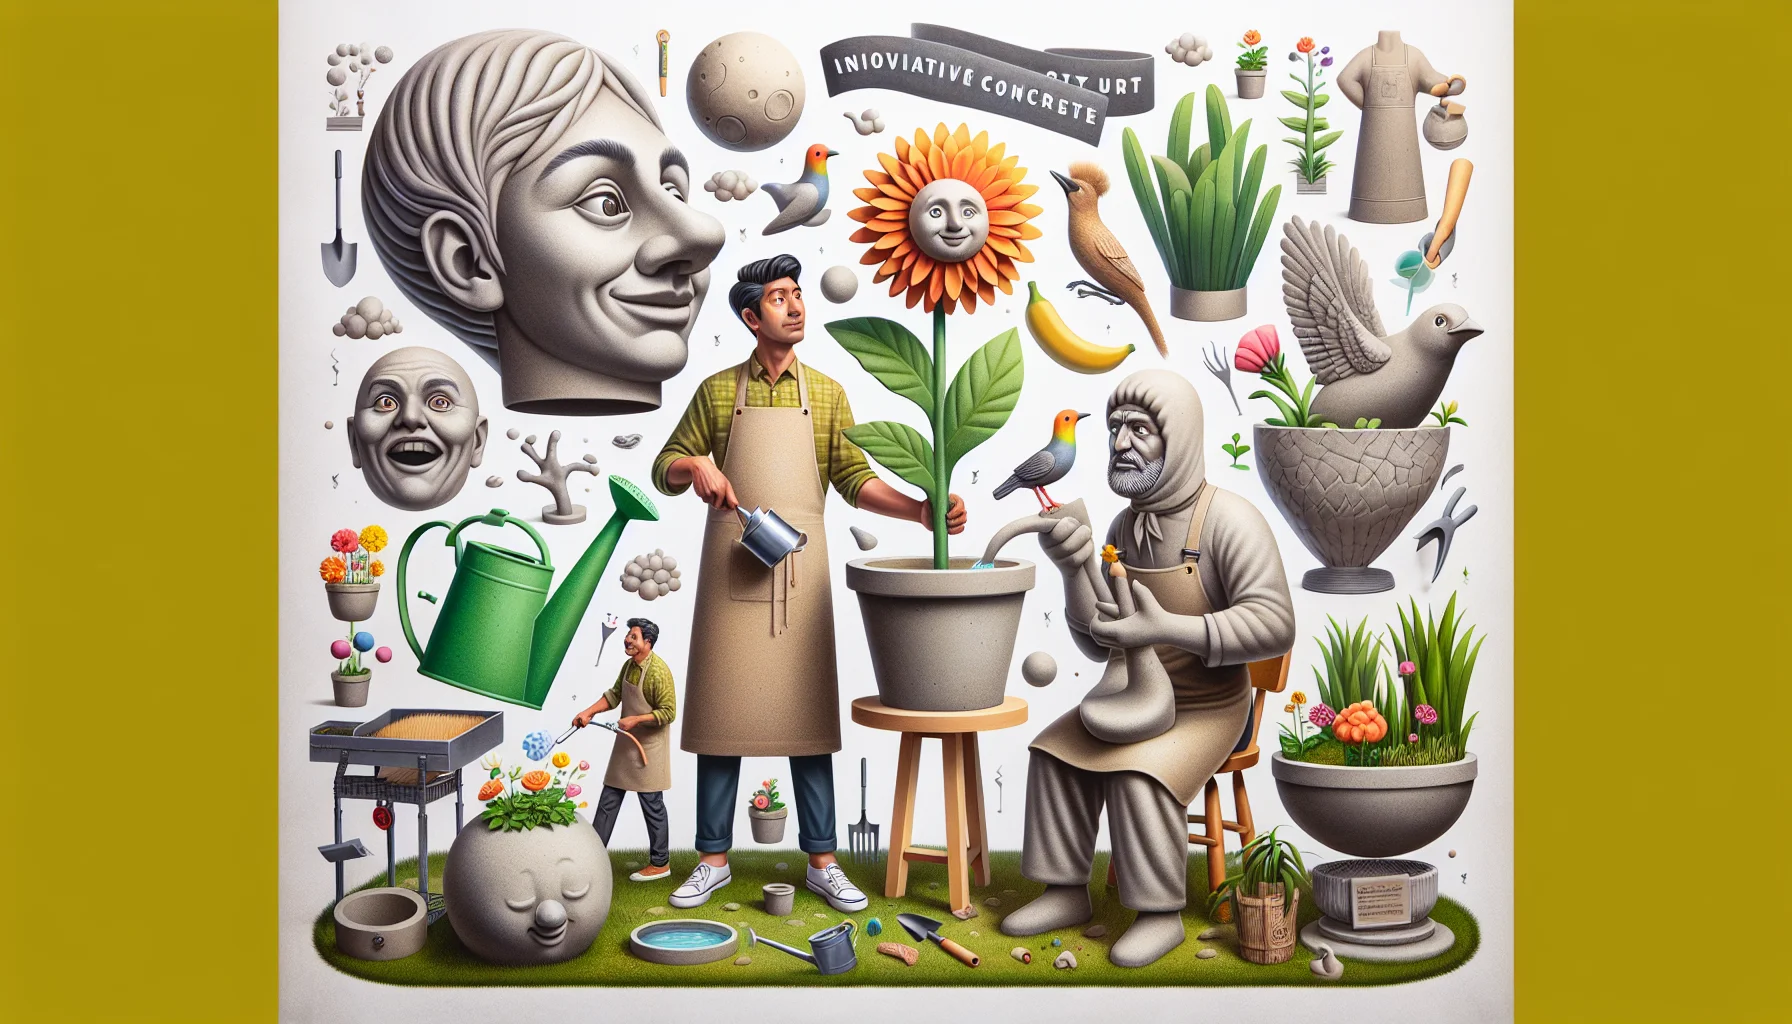 Produce a jovial, realistic illustration exhibiting the playful usage of Innovative Concrete Creations in the context of gardening. Imagine a scene where uniquely designed concrete planters and garden figurines are being employed in humorous instances. Possibly portray South Asian male in an apron bemusedly watering a concrete flower, or a Hispanic female having a surprise expression upon seeing a lifelike concrete bird statue. These elements come together to create an appealing and amusing tableau that celebrates the joy of gardening.